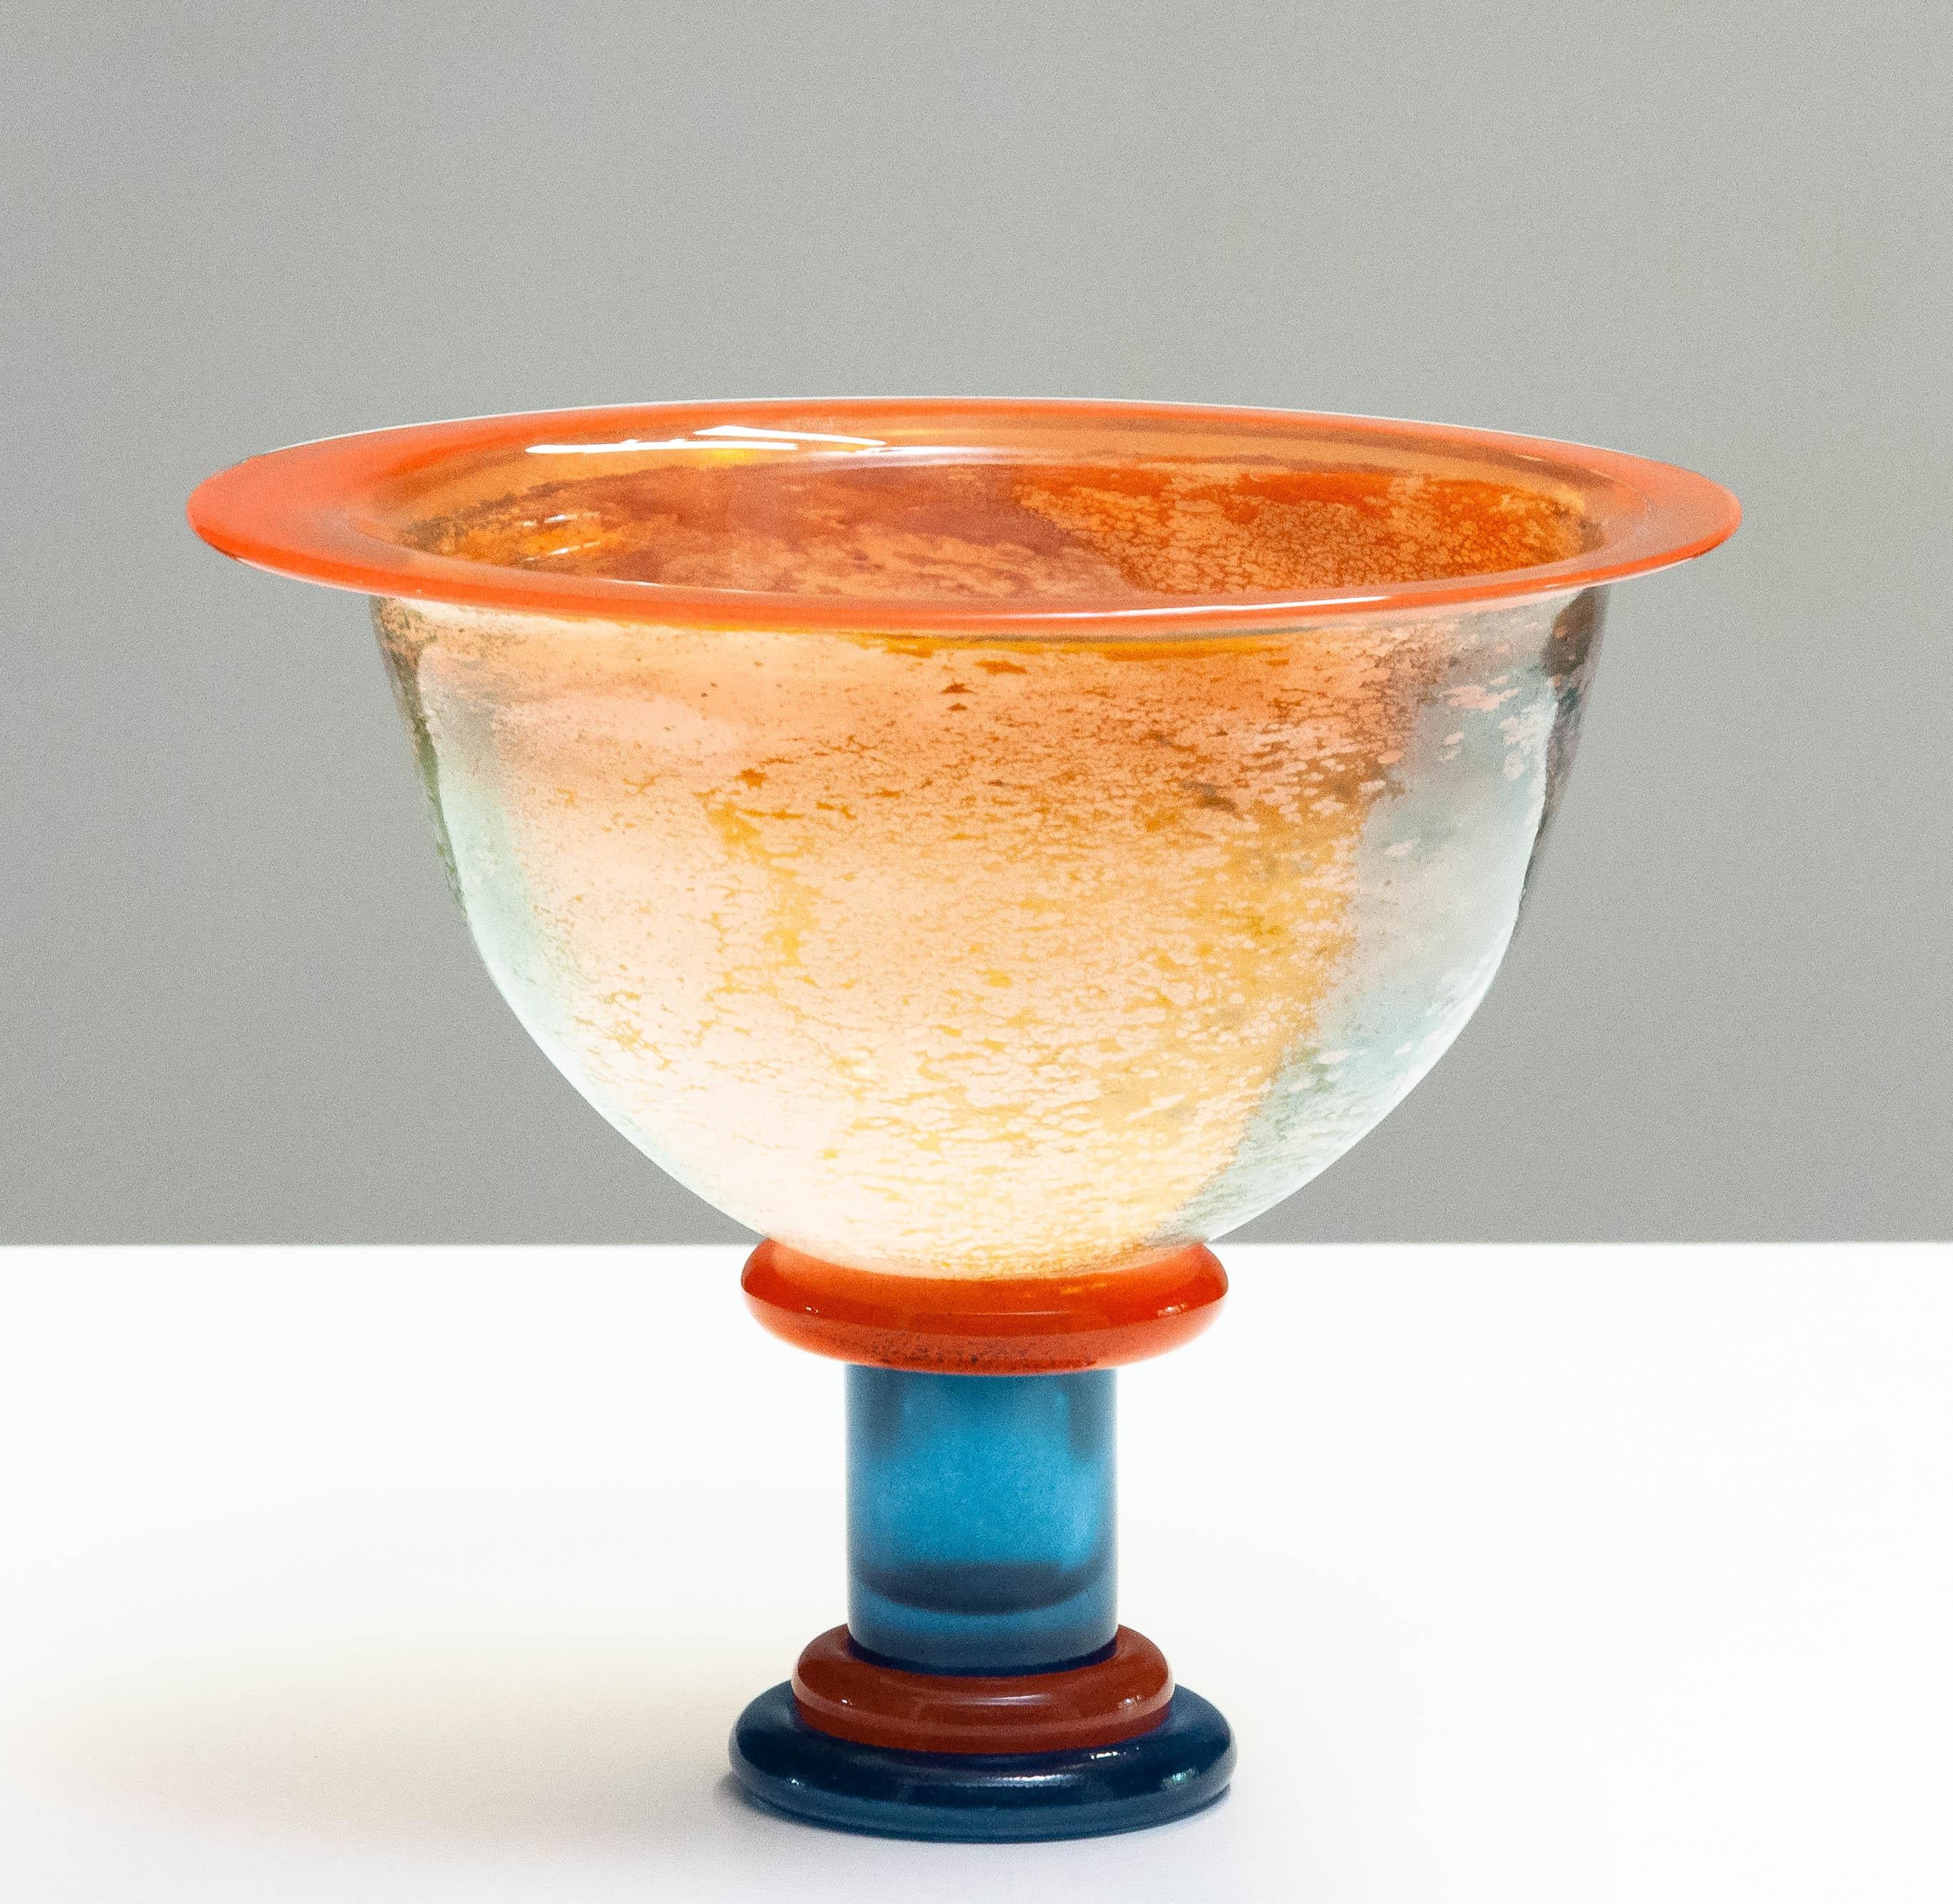 1990's Large Art Glass Bowl 'Cancan Series' by Kjell Engman for Kosta Boda In Excellent Condition For Sale In Silvolde, Gelderland